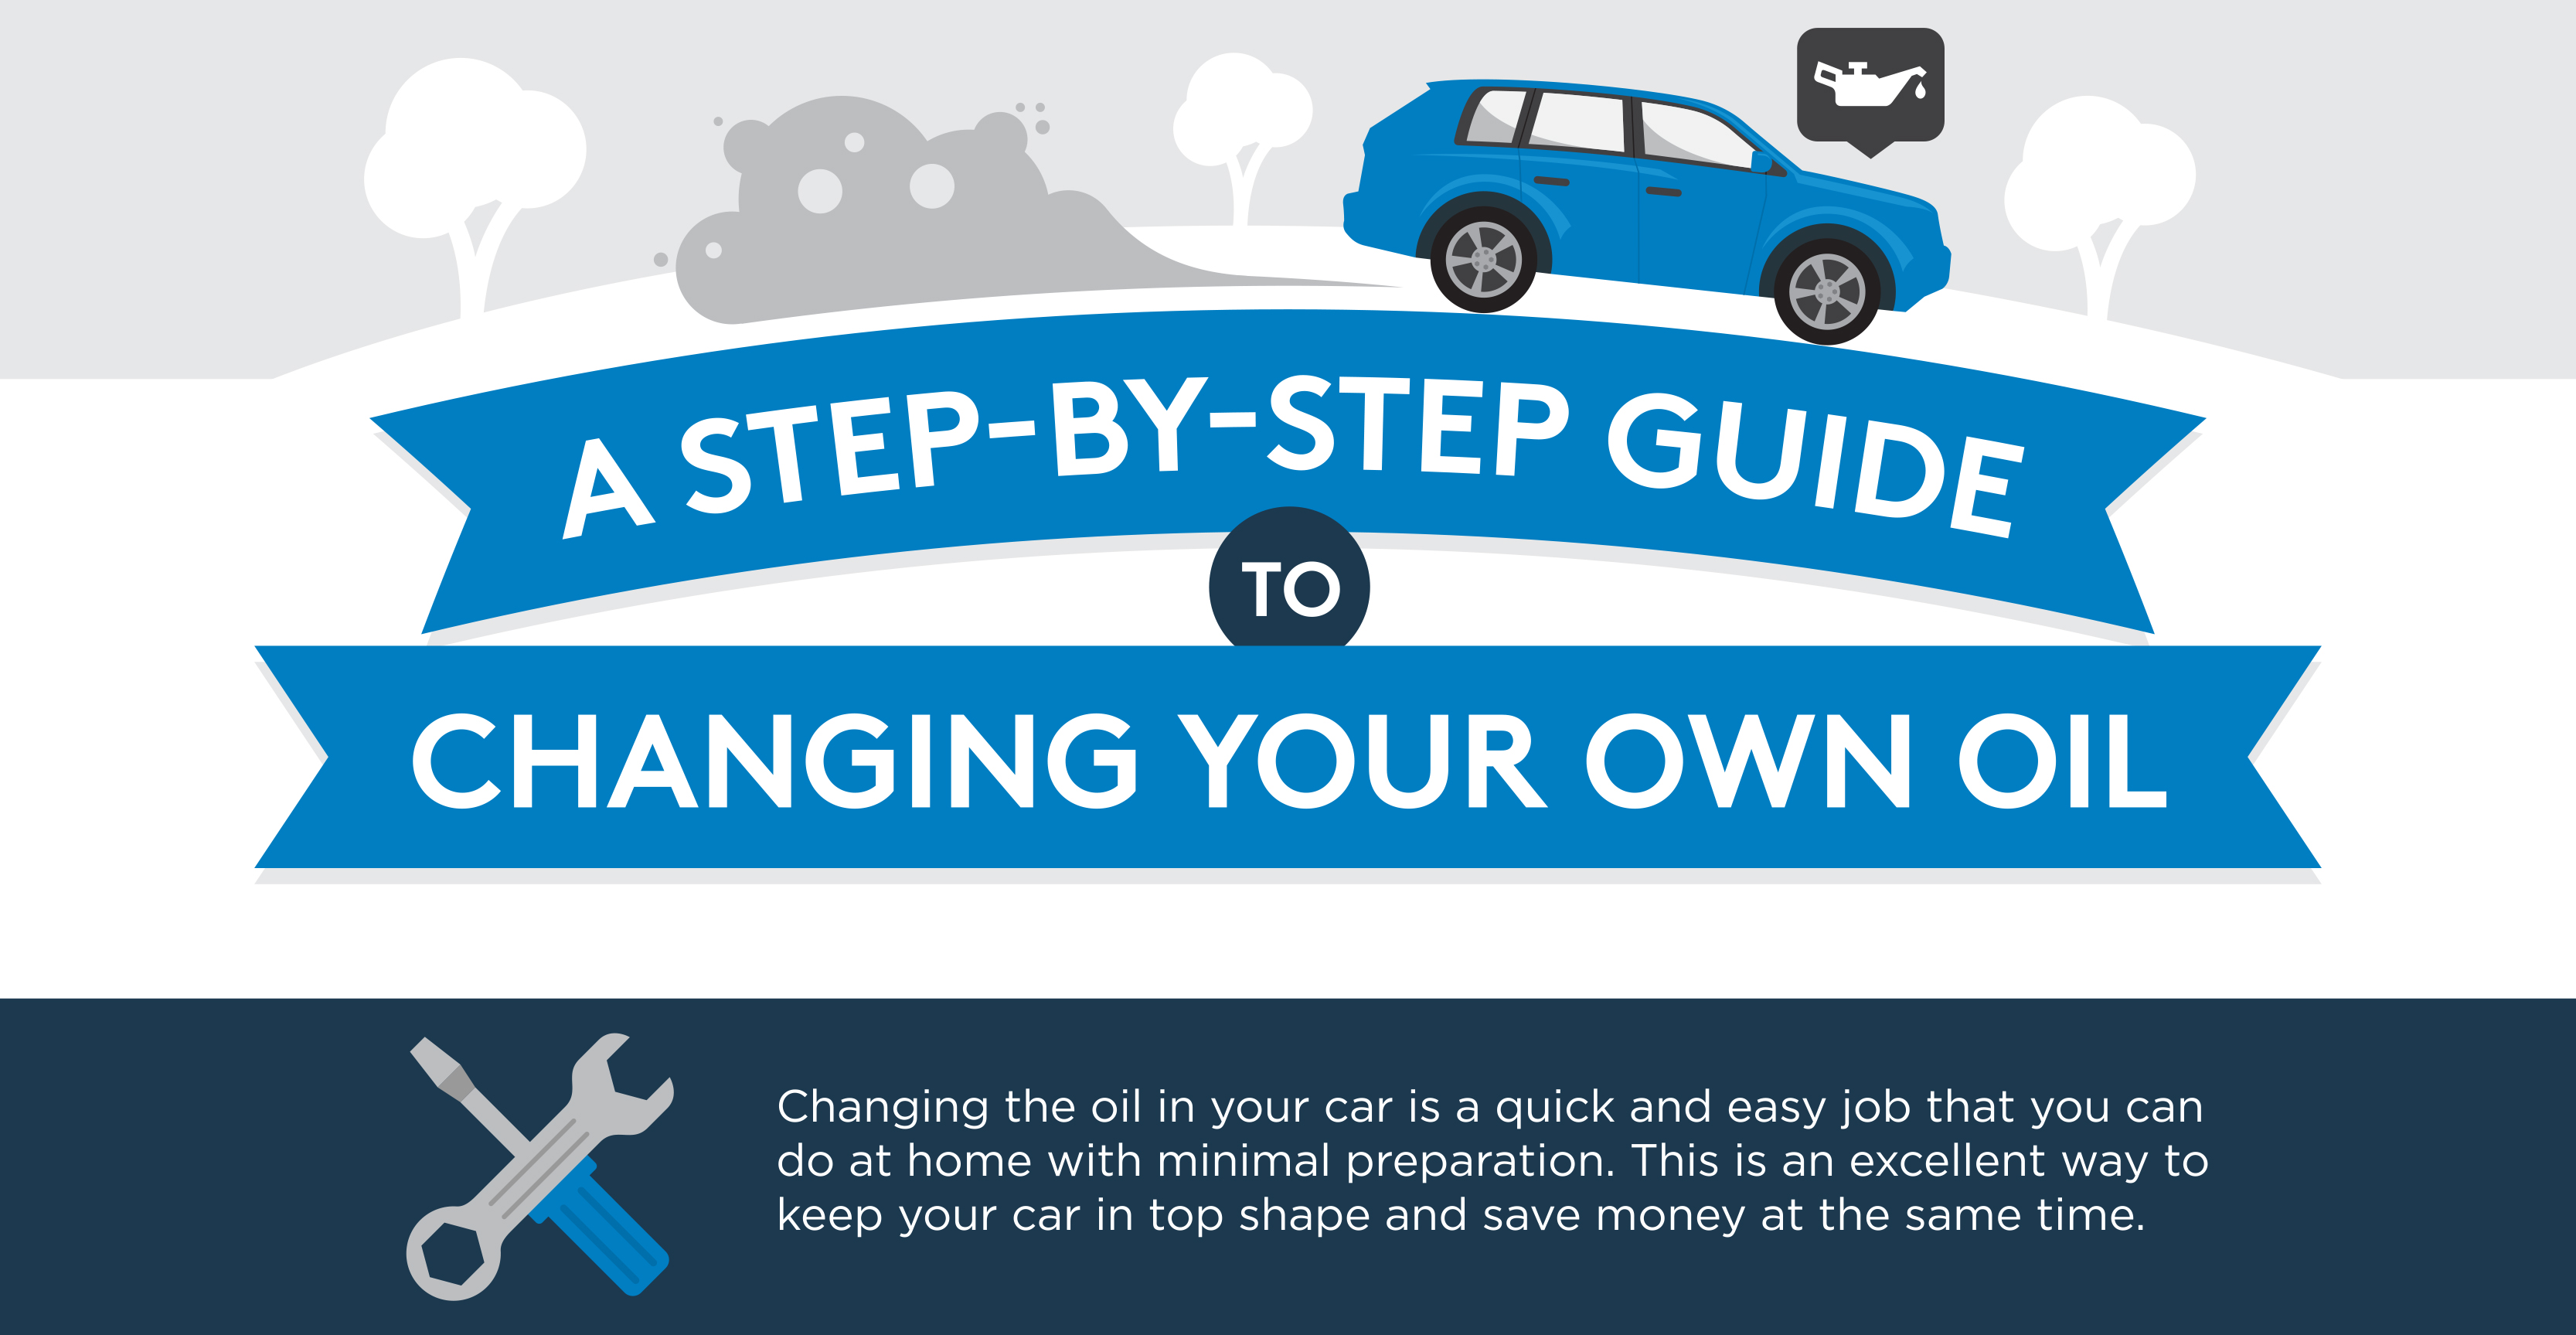 Changing Your Own Oil